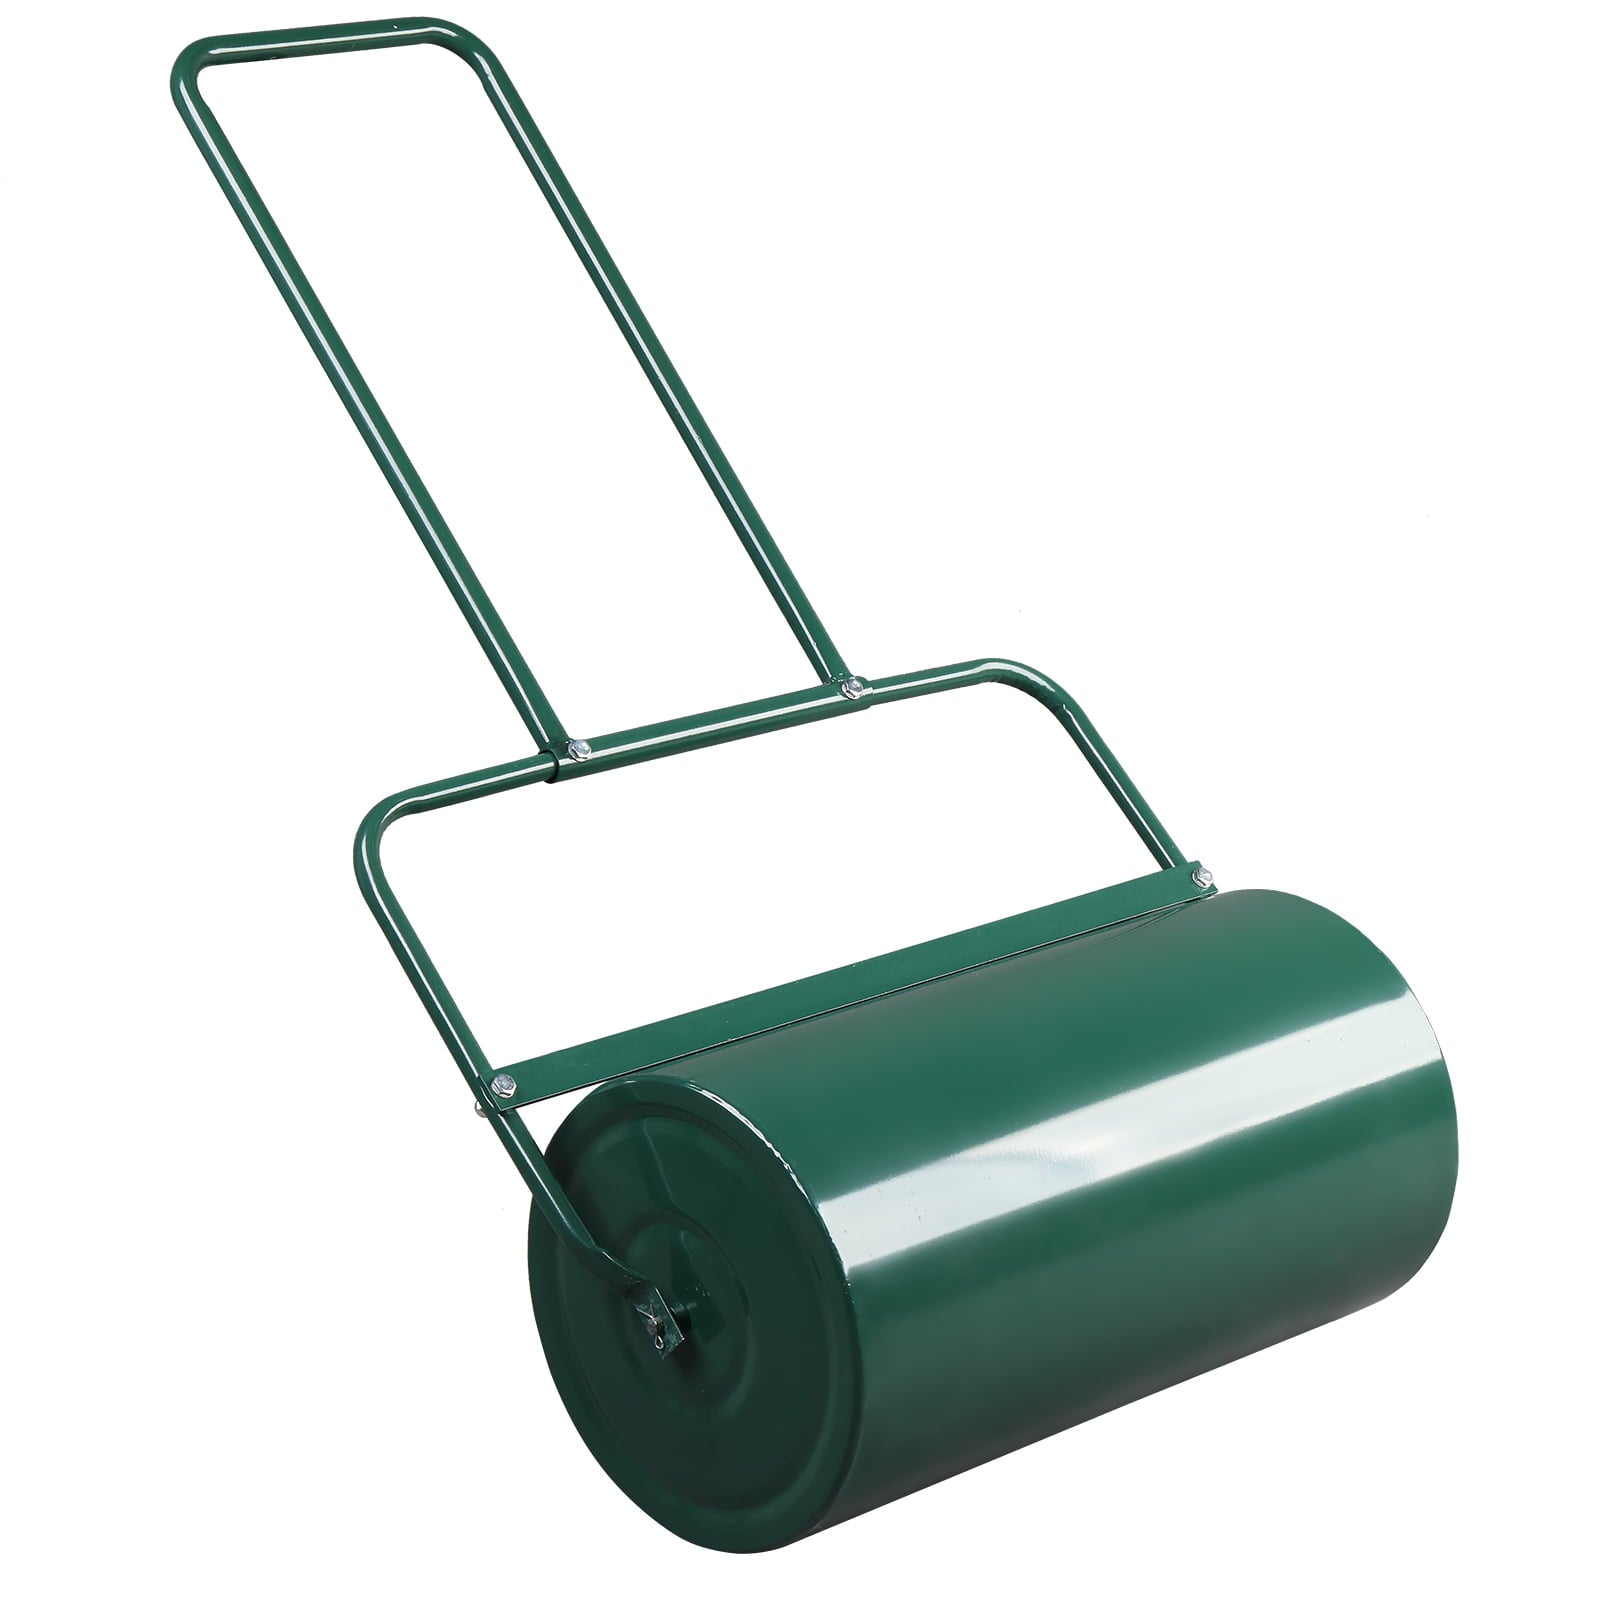 GoDecor 24in Lawn Roller with Handle Roller for Grass Cylindrical Garden Roller Steel Green